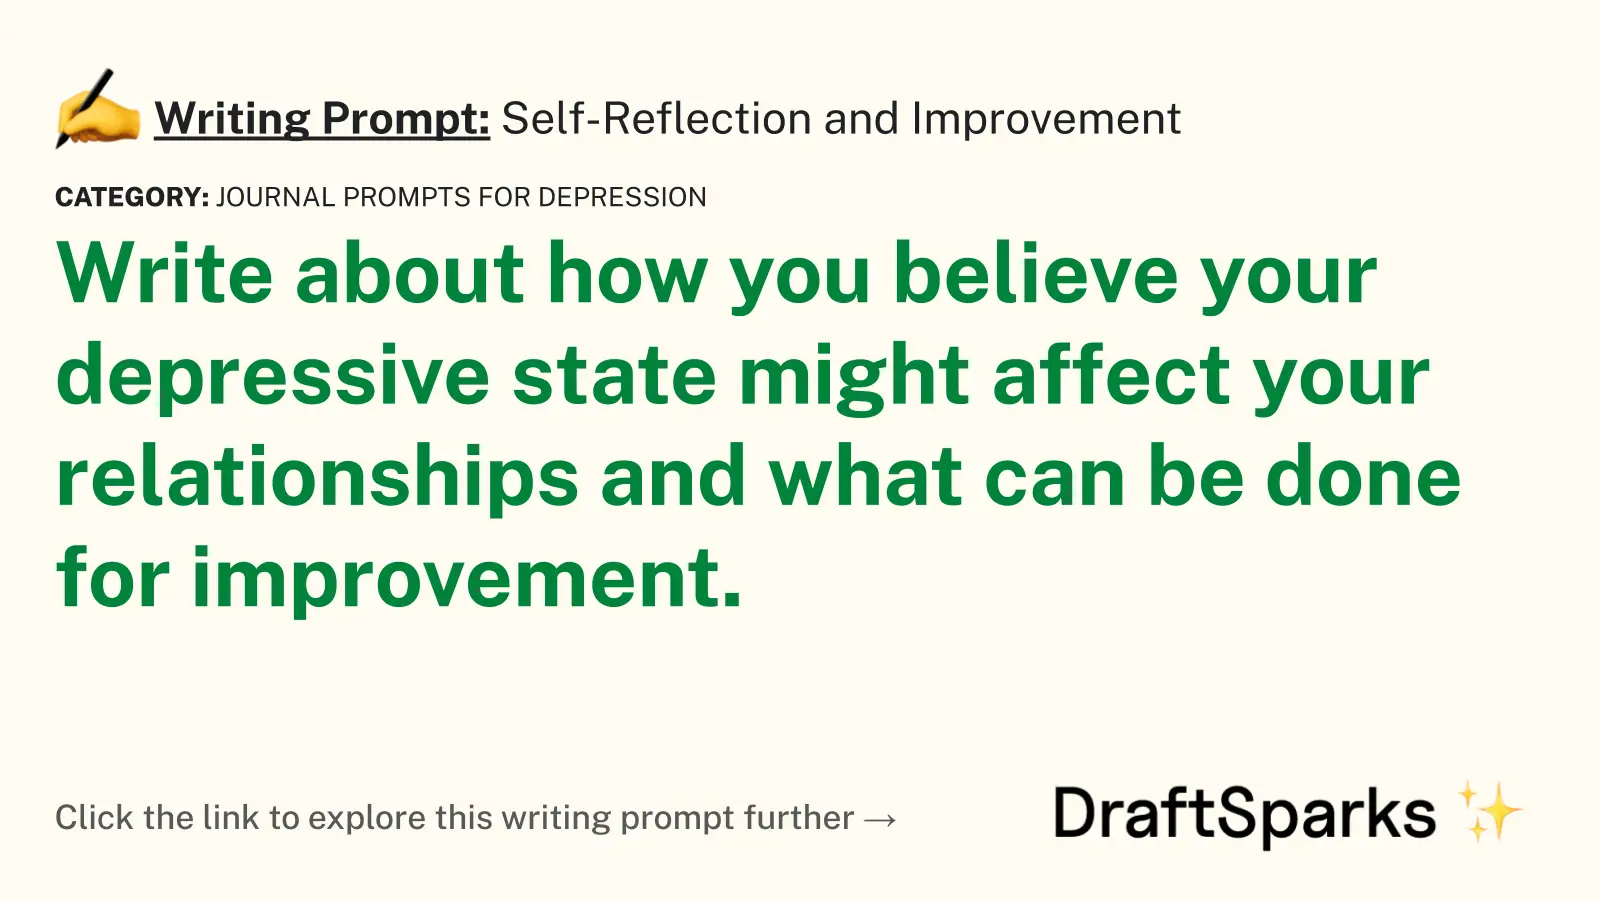 Self-Reflection and Improvement